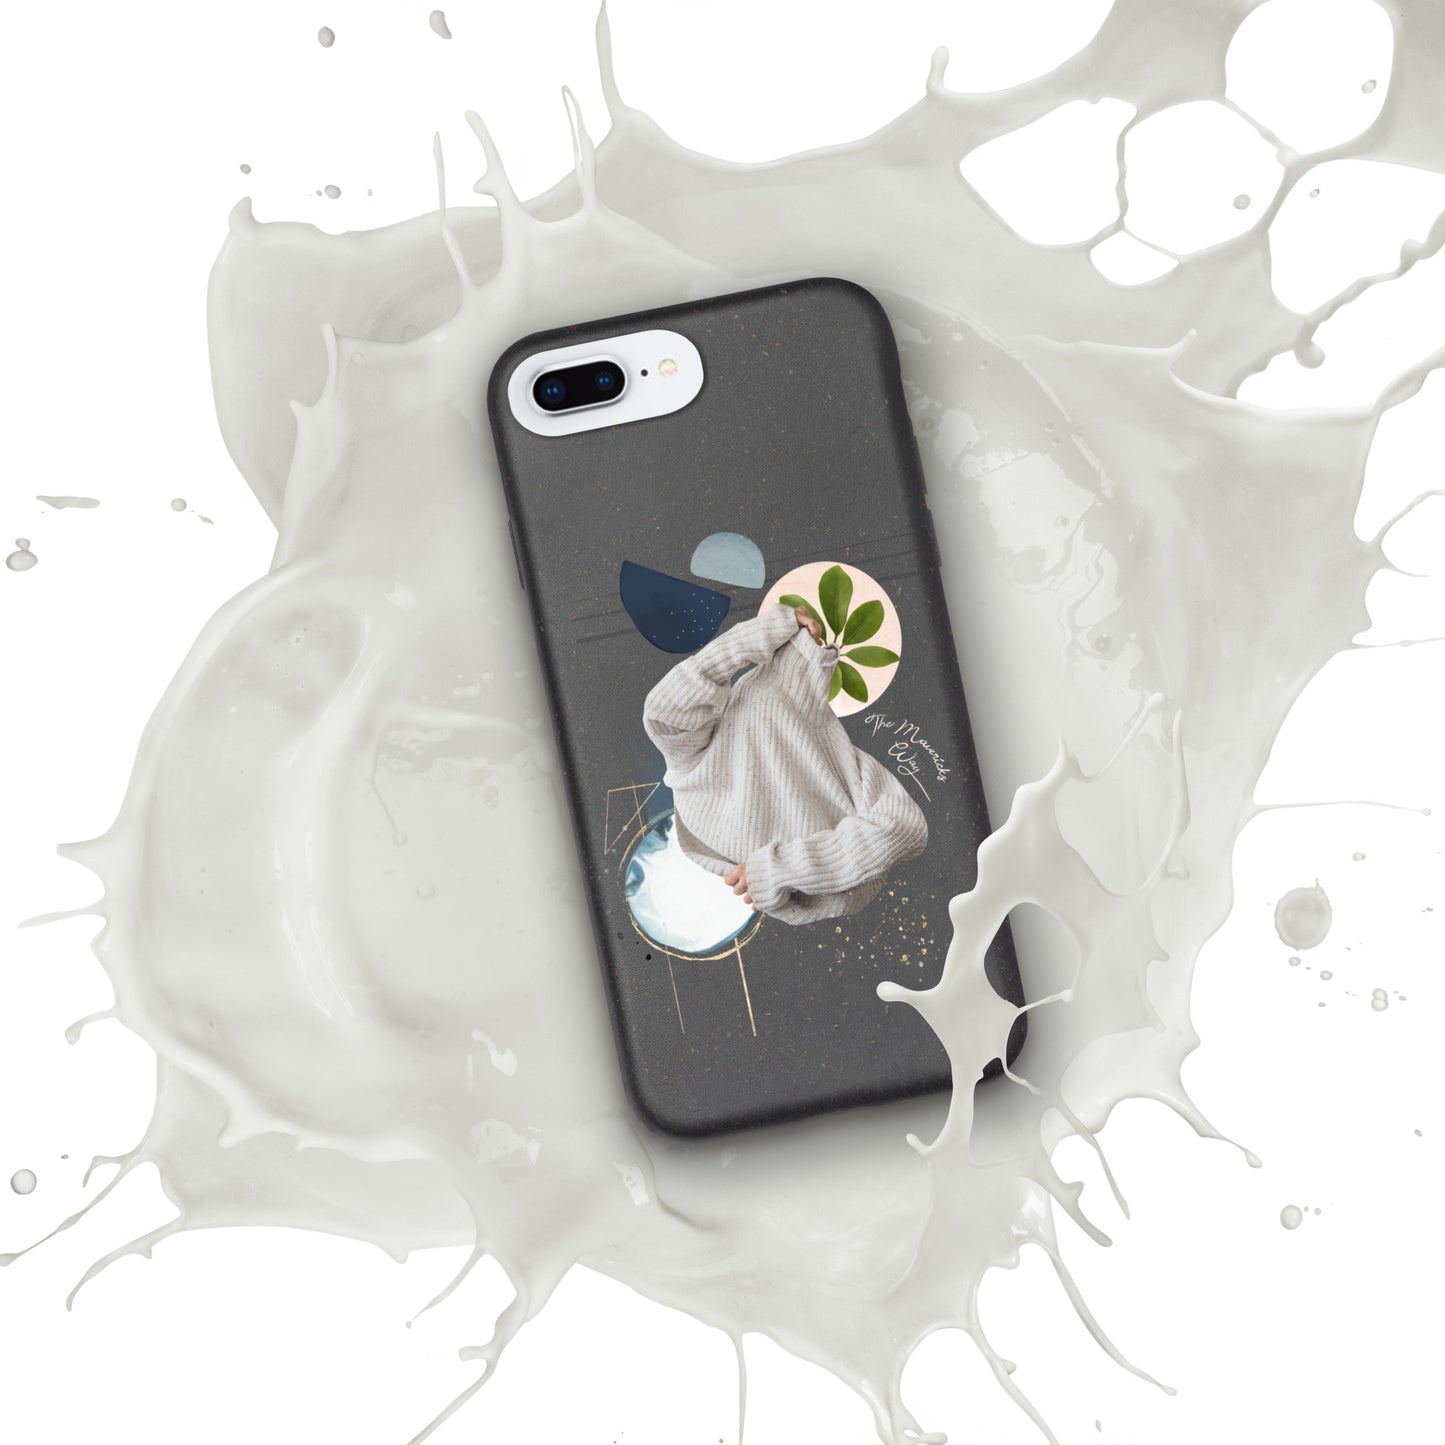 TIME FOR CHANGE iPhone case